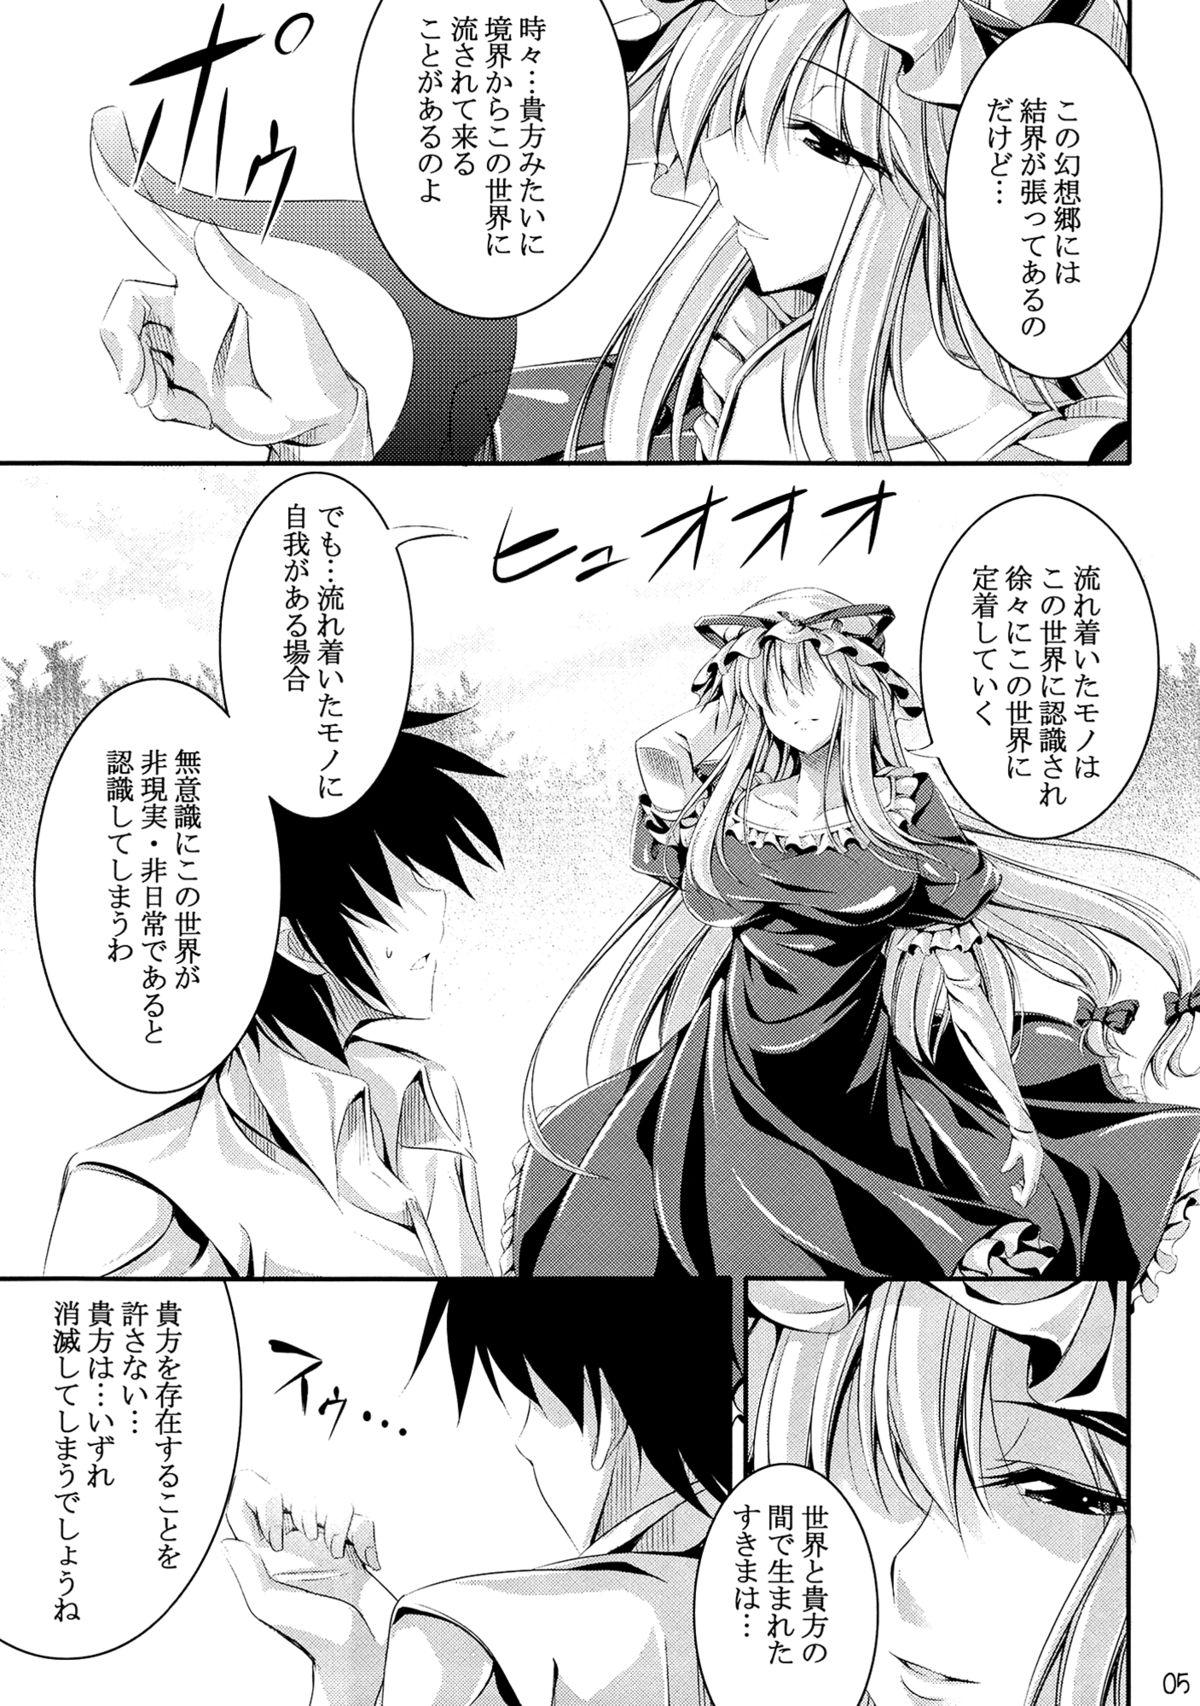 Cdzinha Welcome to Wonder World - Touhou project Weird - Page 4